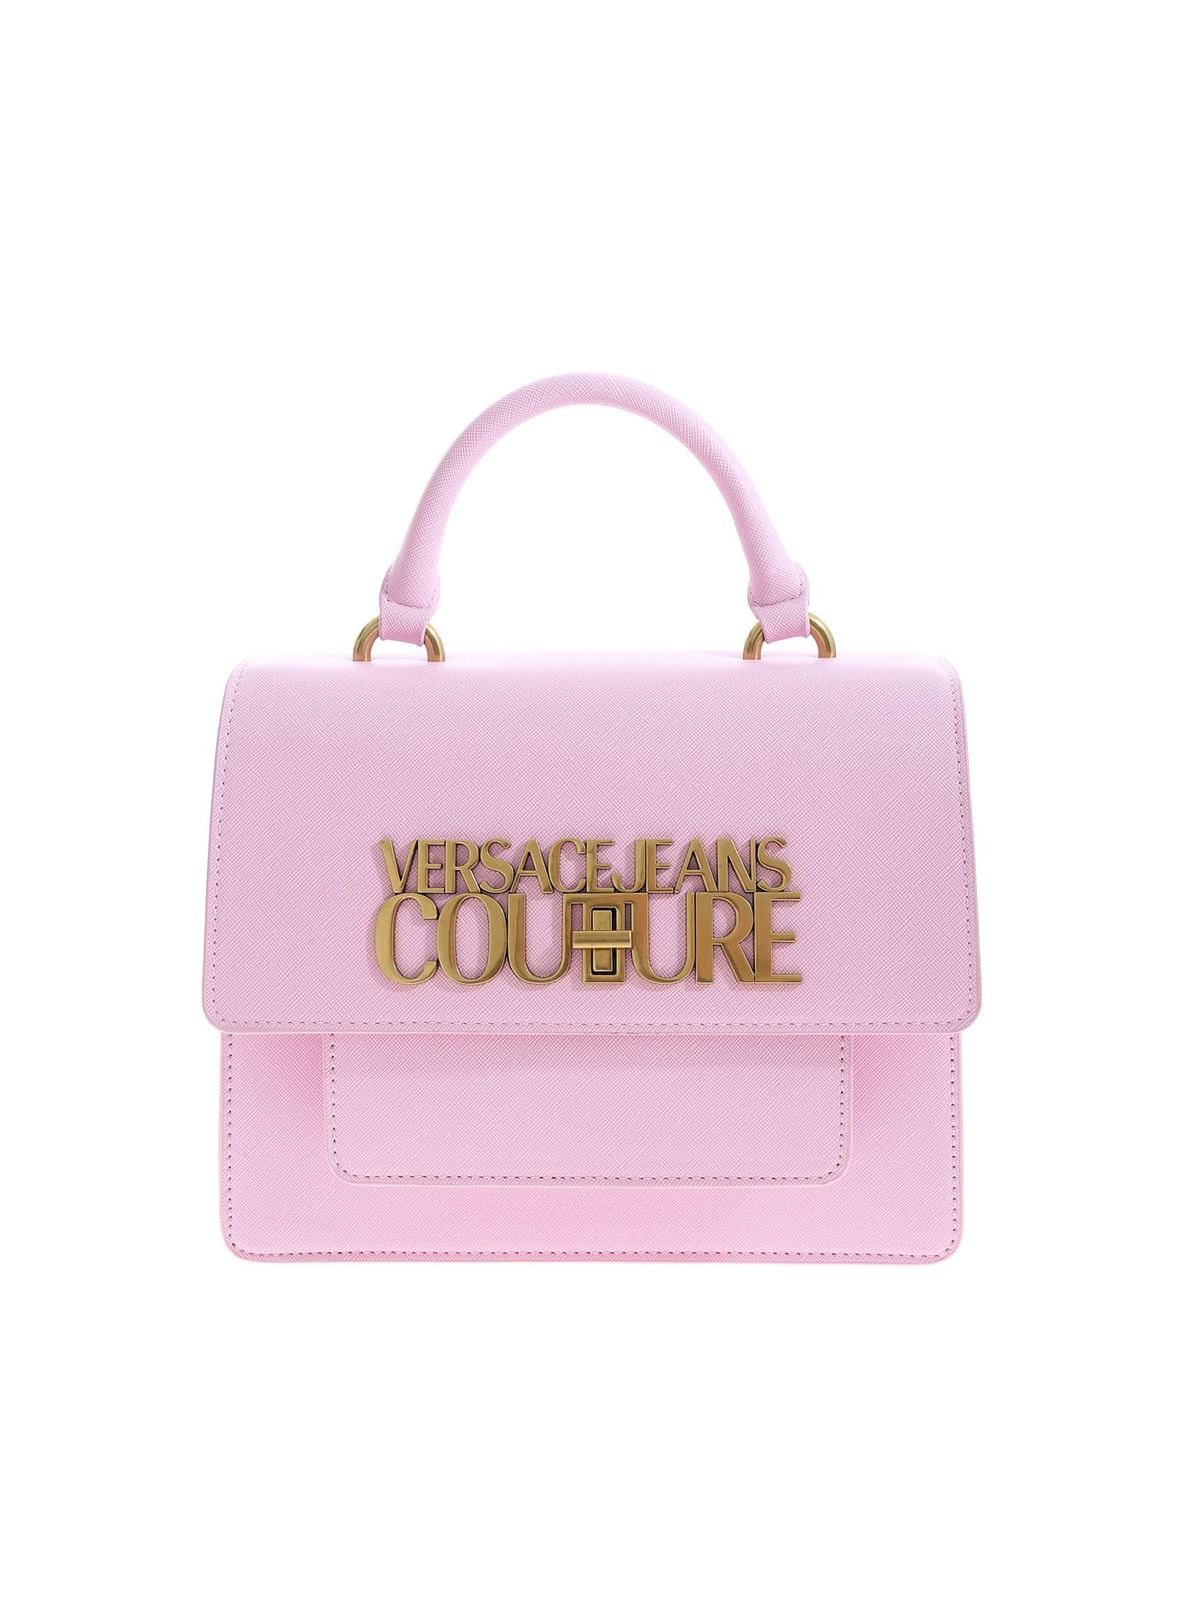 Versace Jeans Couture Logo Tote Bag